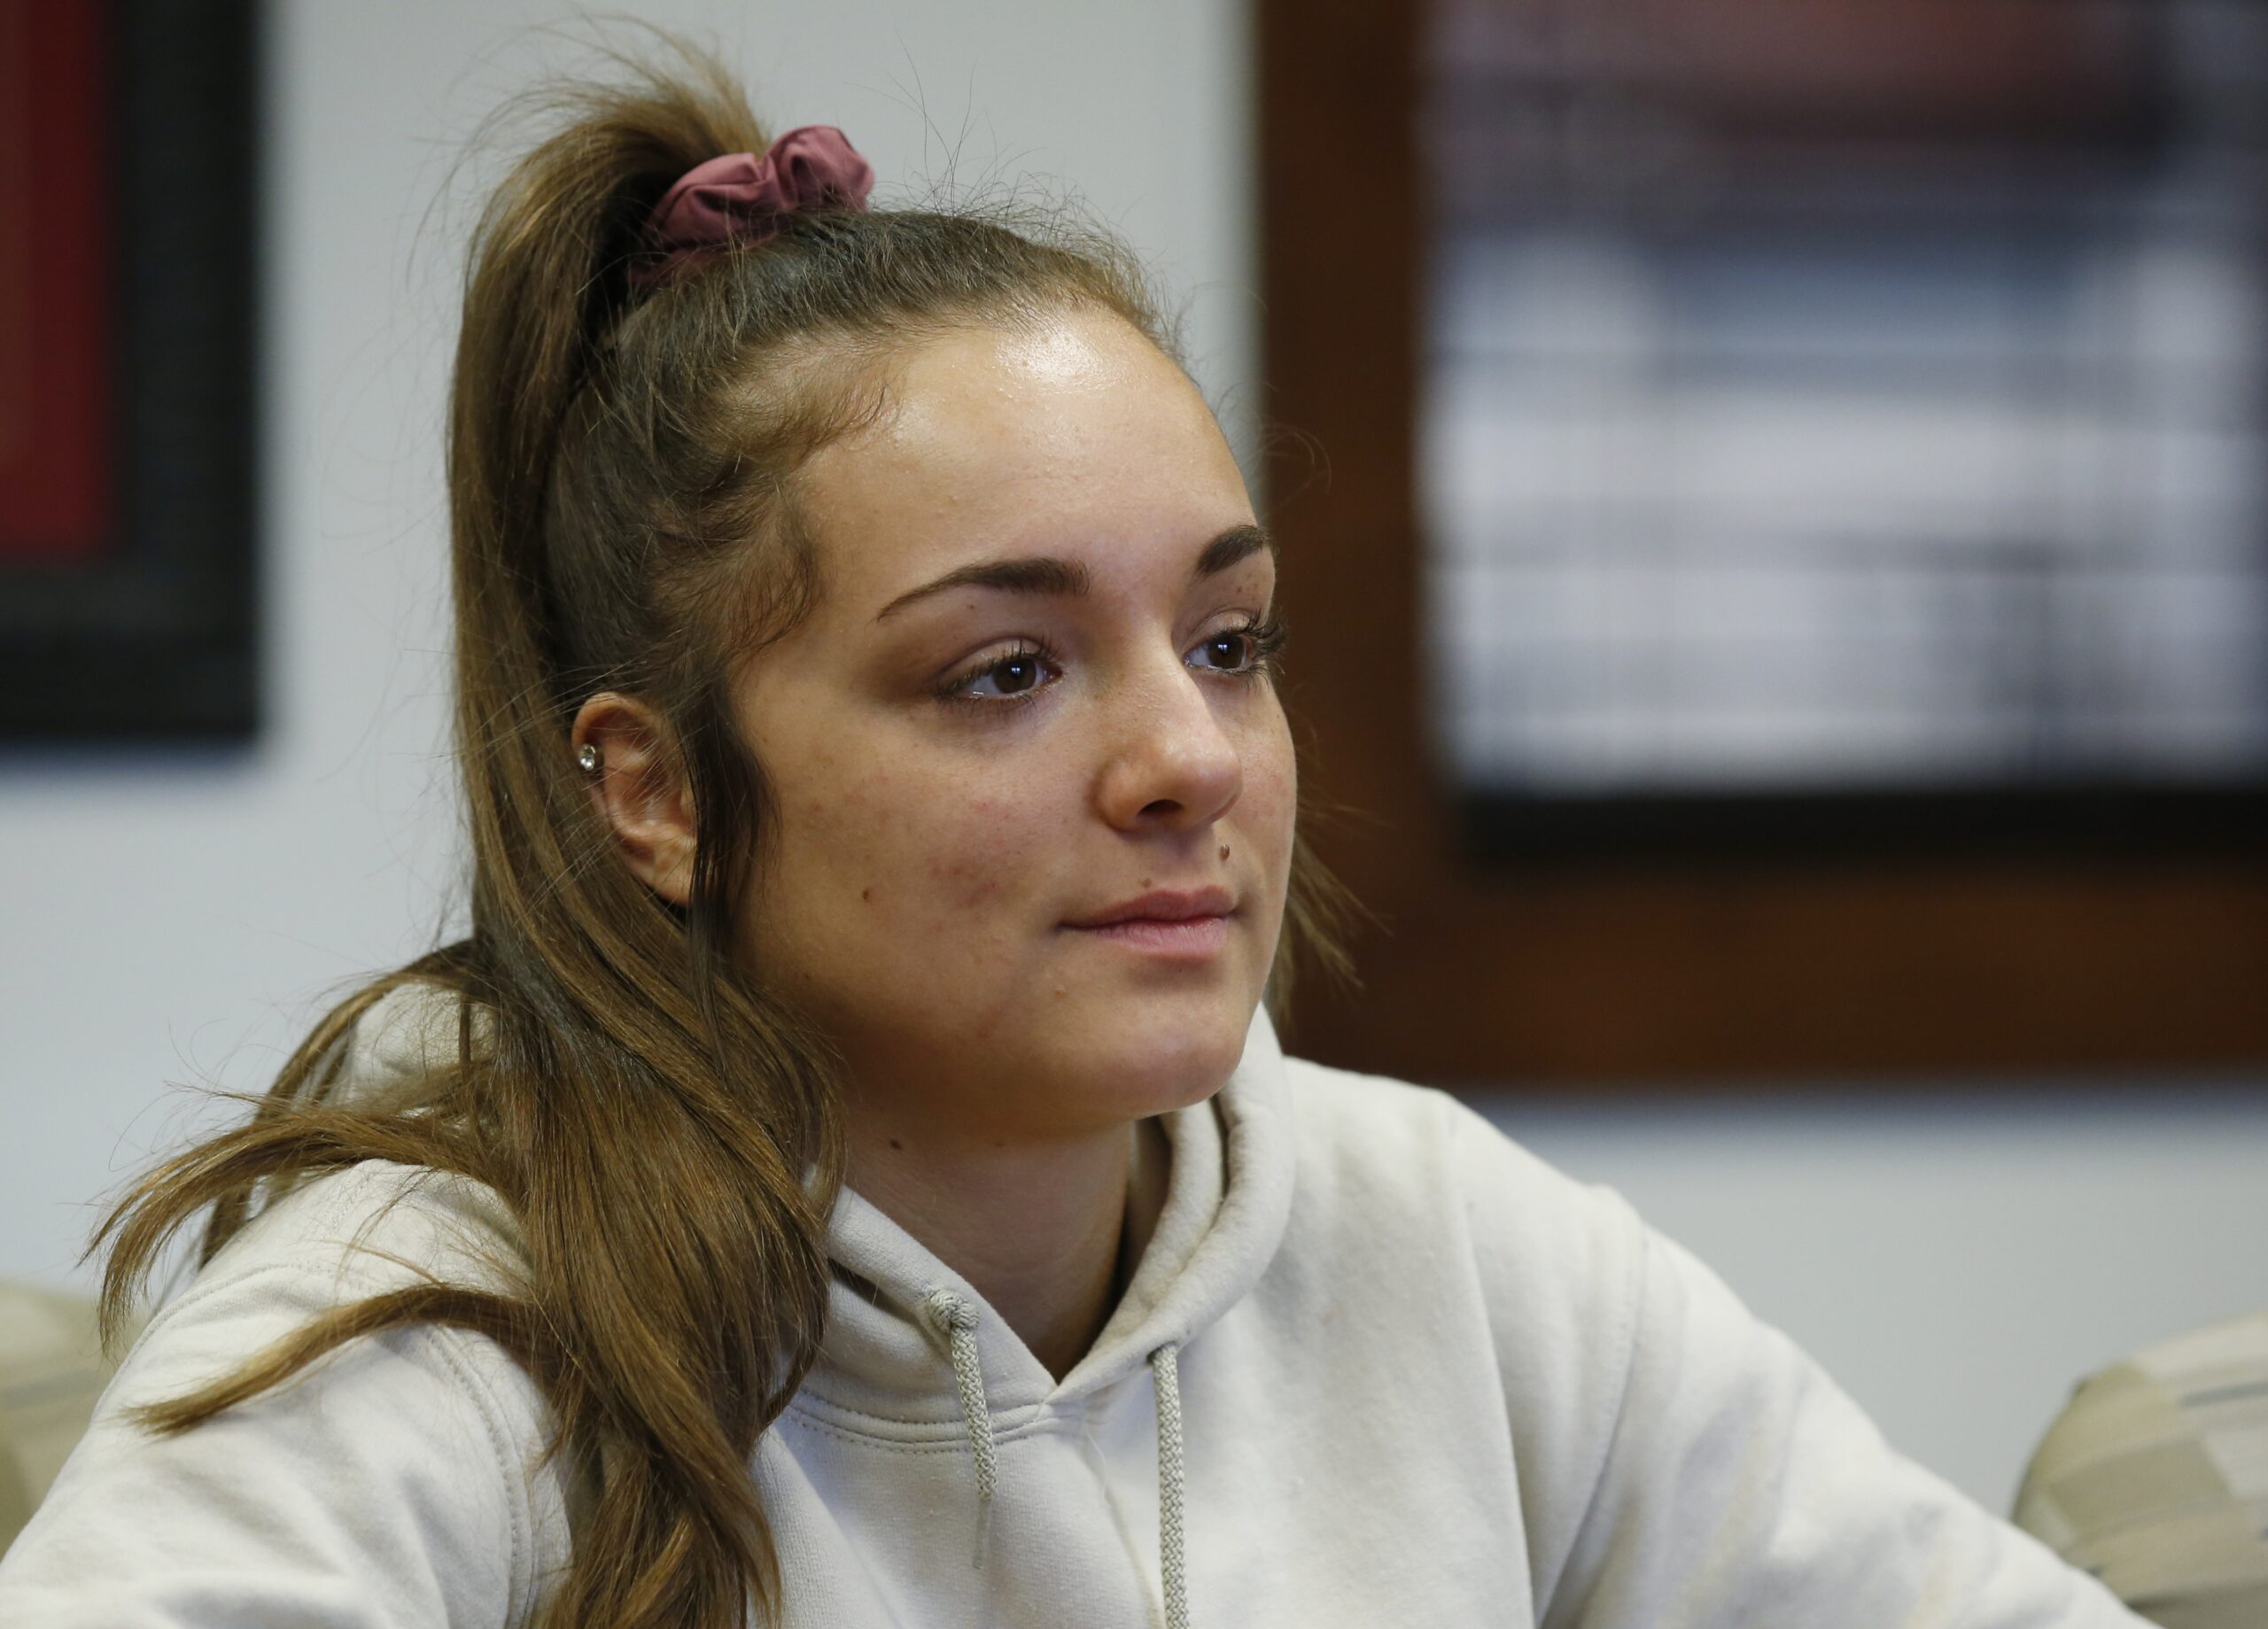 Maggie Nichols, who survived sexual abuse by Larry Nassar